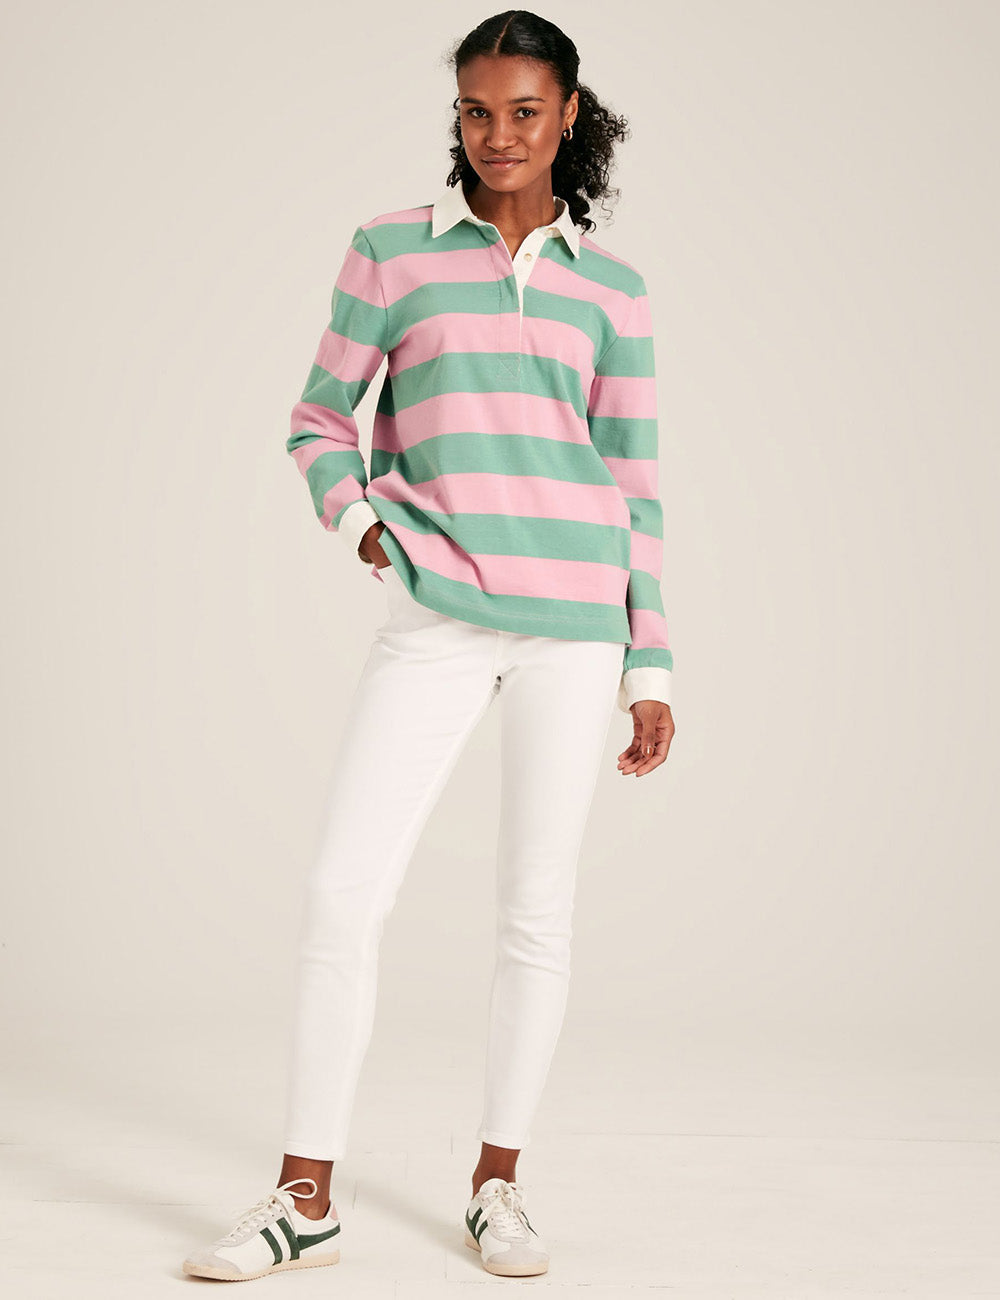 Joules Falmouth Rugby Shirt - Pink/Green Stripe